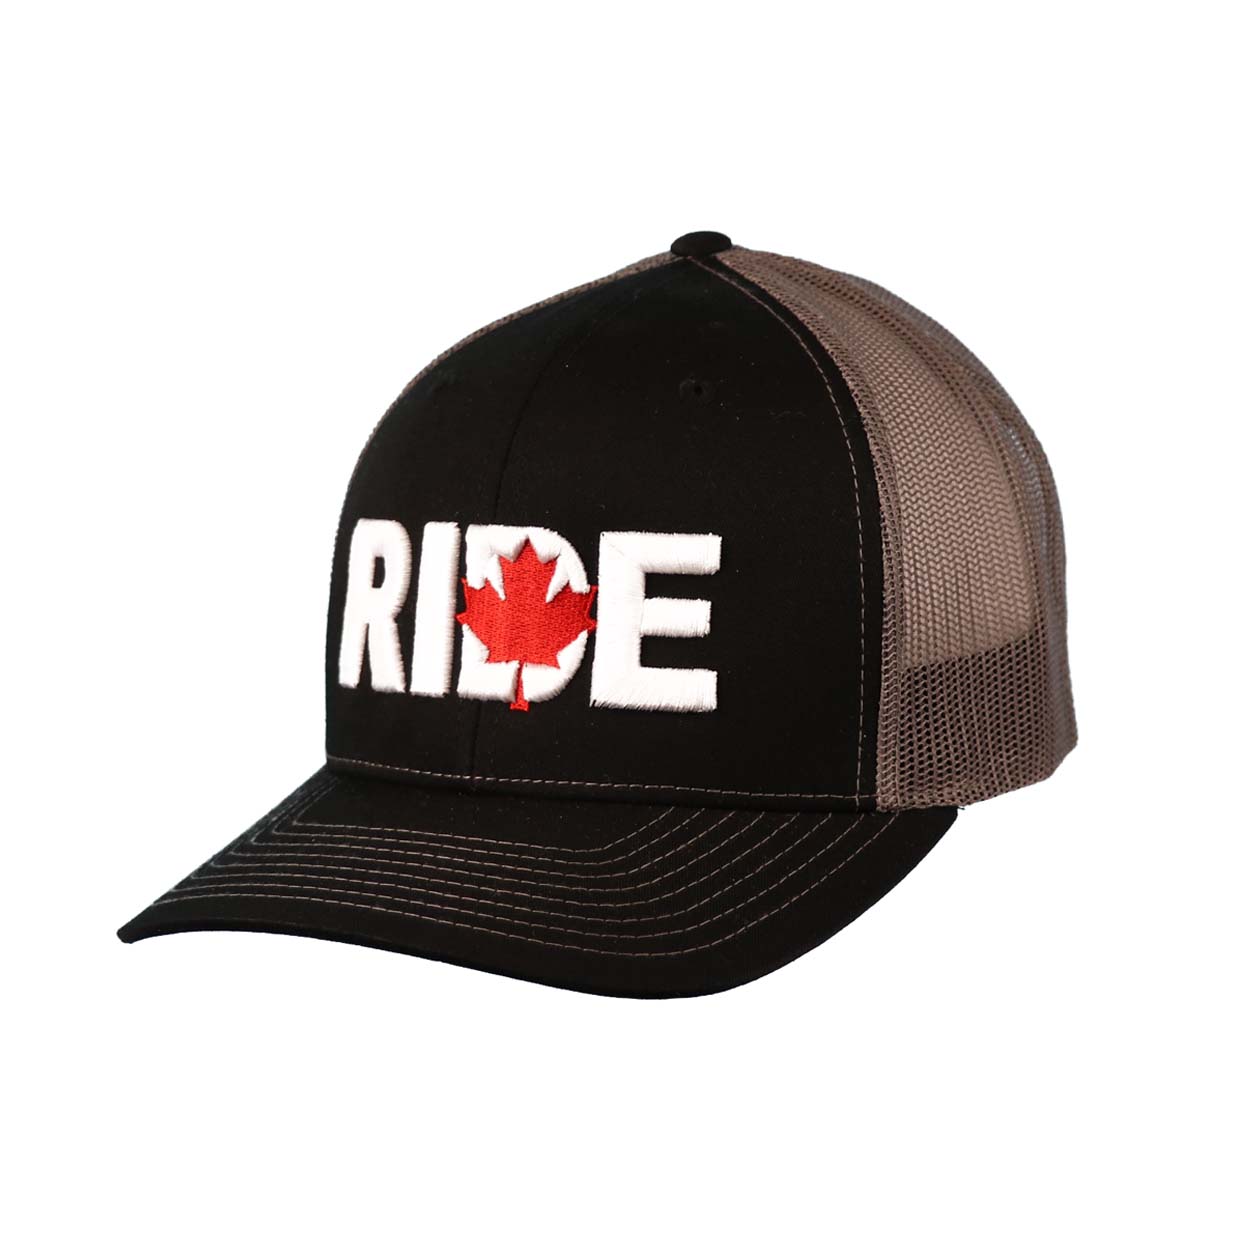 Ride Canada Classic Pro 3D Puff Embroidered Snapback Trucker Hat Black/Red